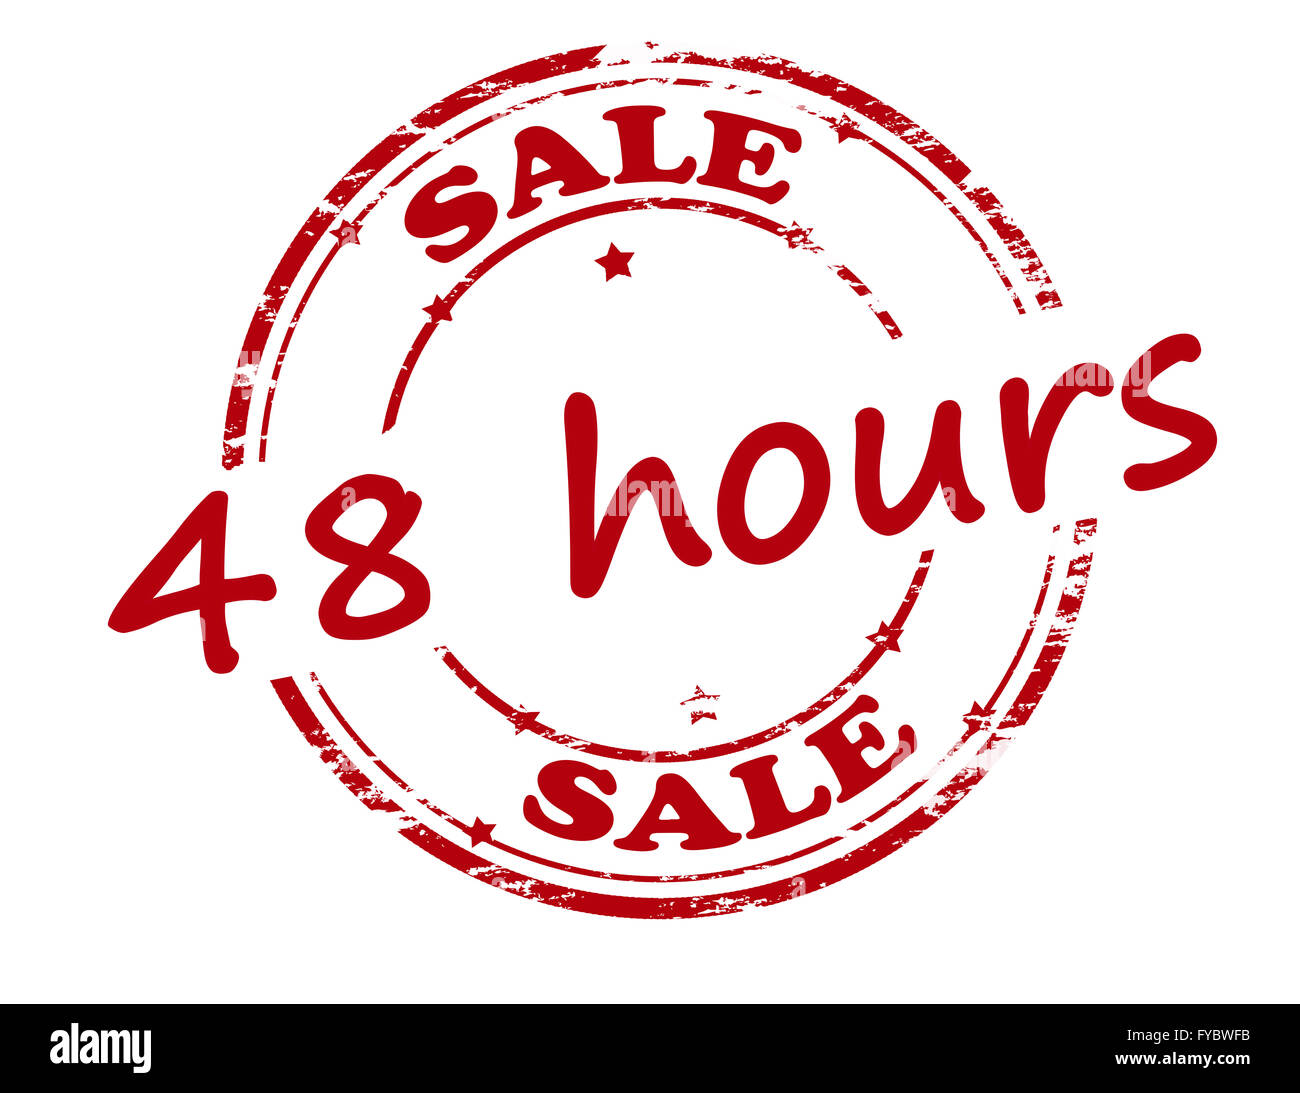 Rubber stamp with text sale forty eight hours inside, vector illustration Stock Photo